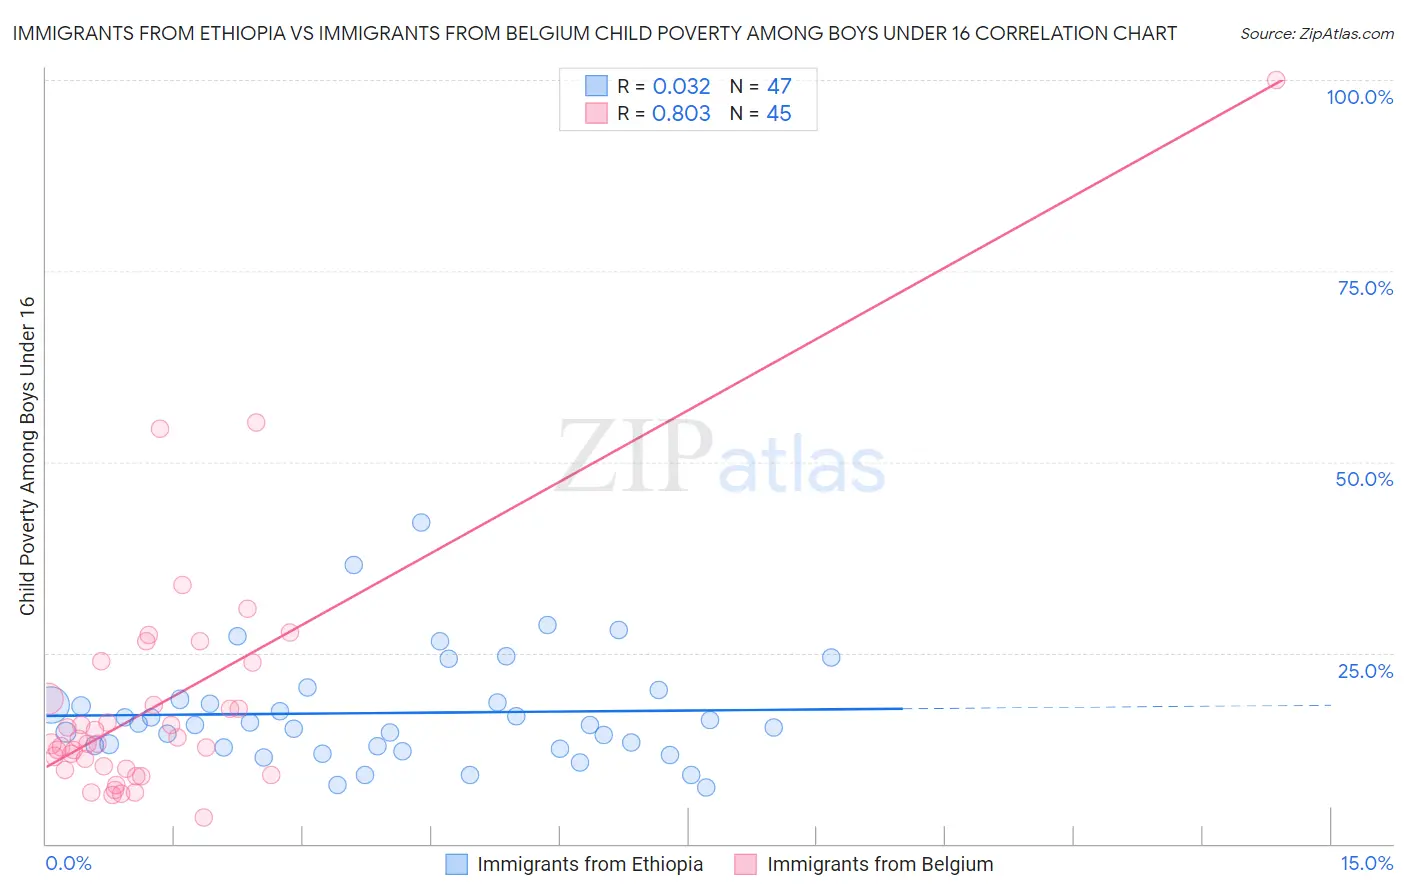 Immigrants from Ethiopia vs Immigrants from Belgium Child Poverty Among Boys Under 16